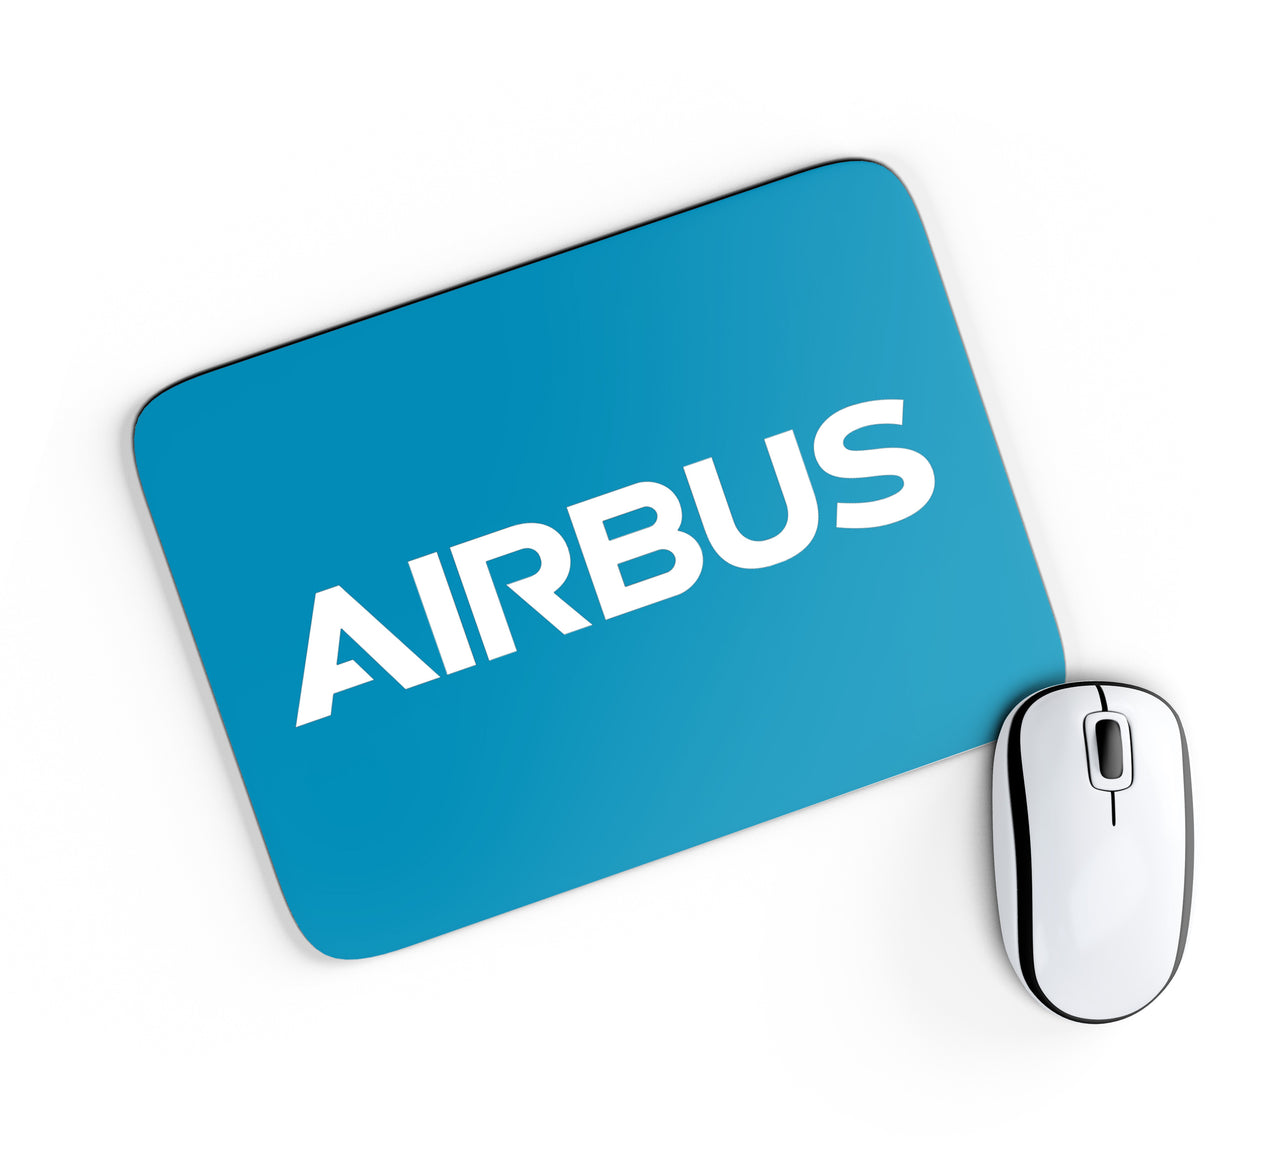 Airbus & Text Designed Mouse Pads